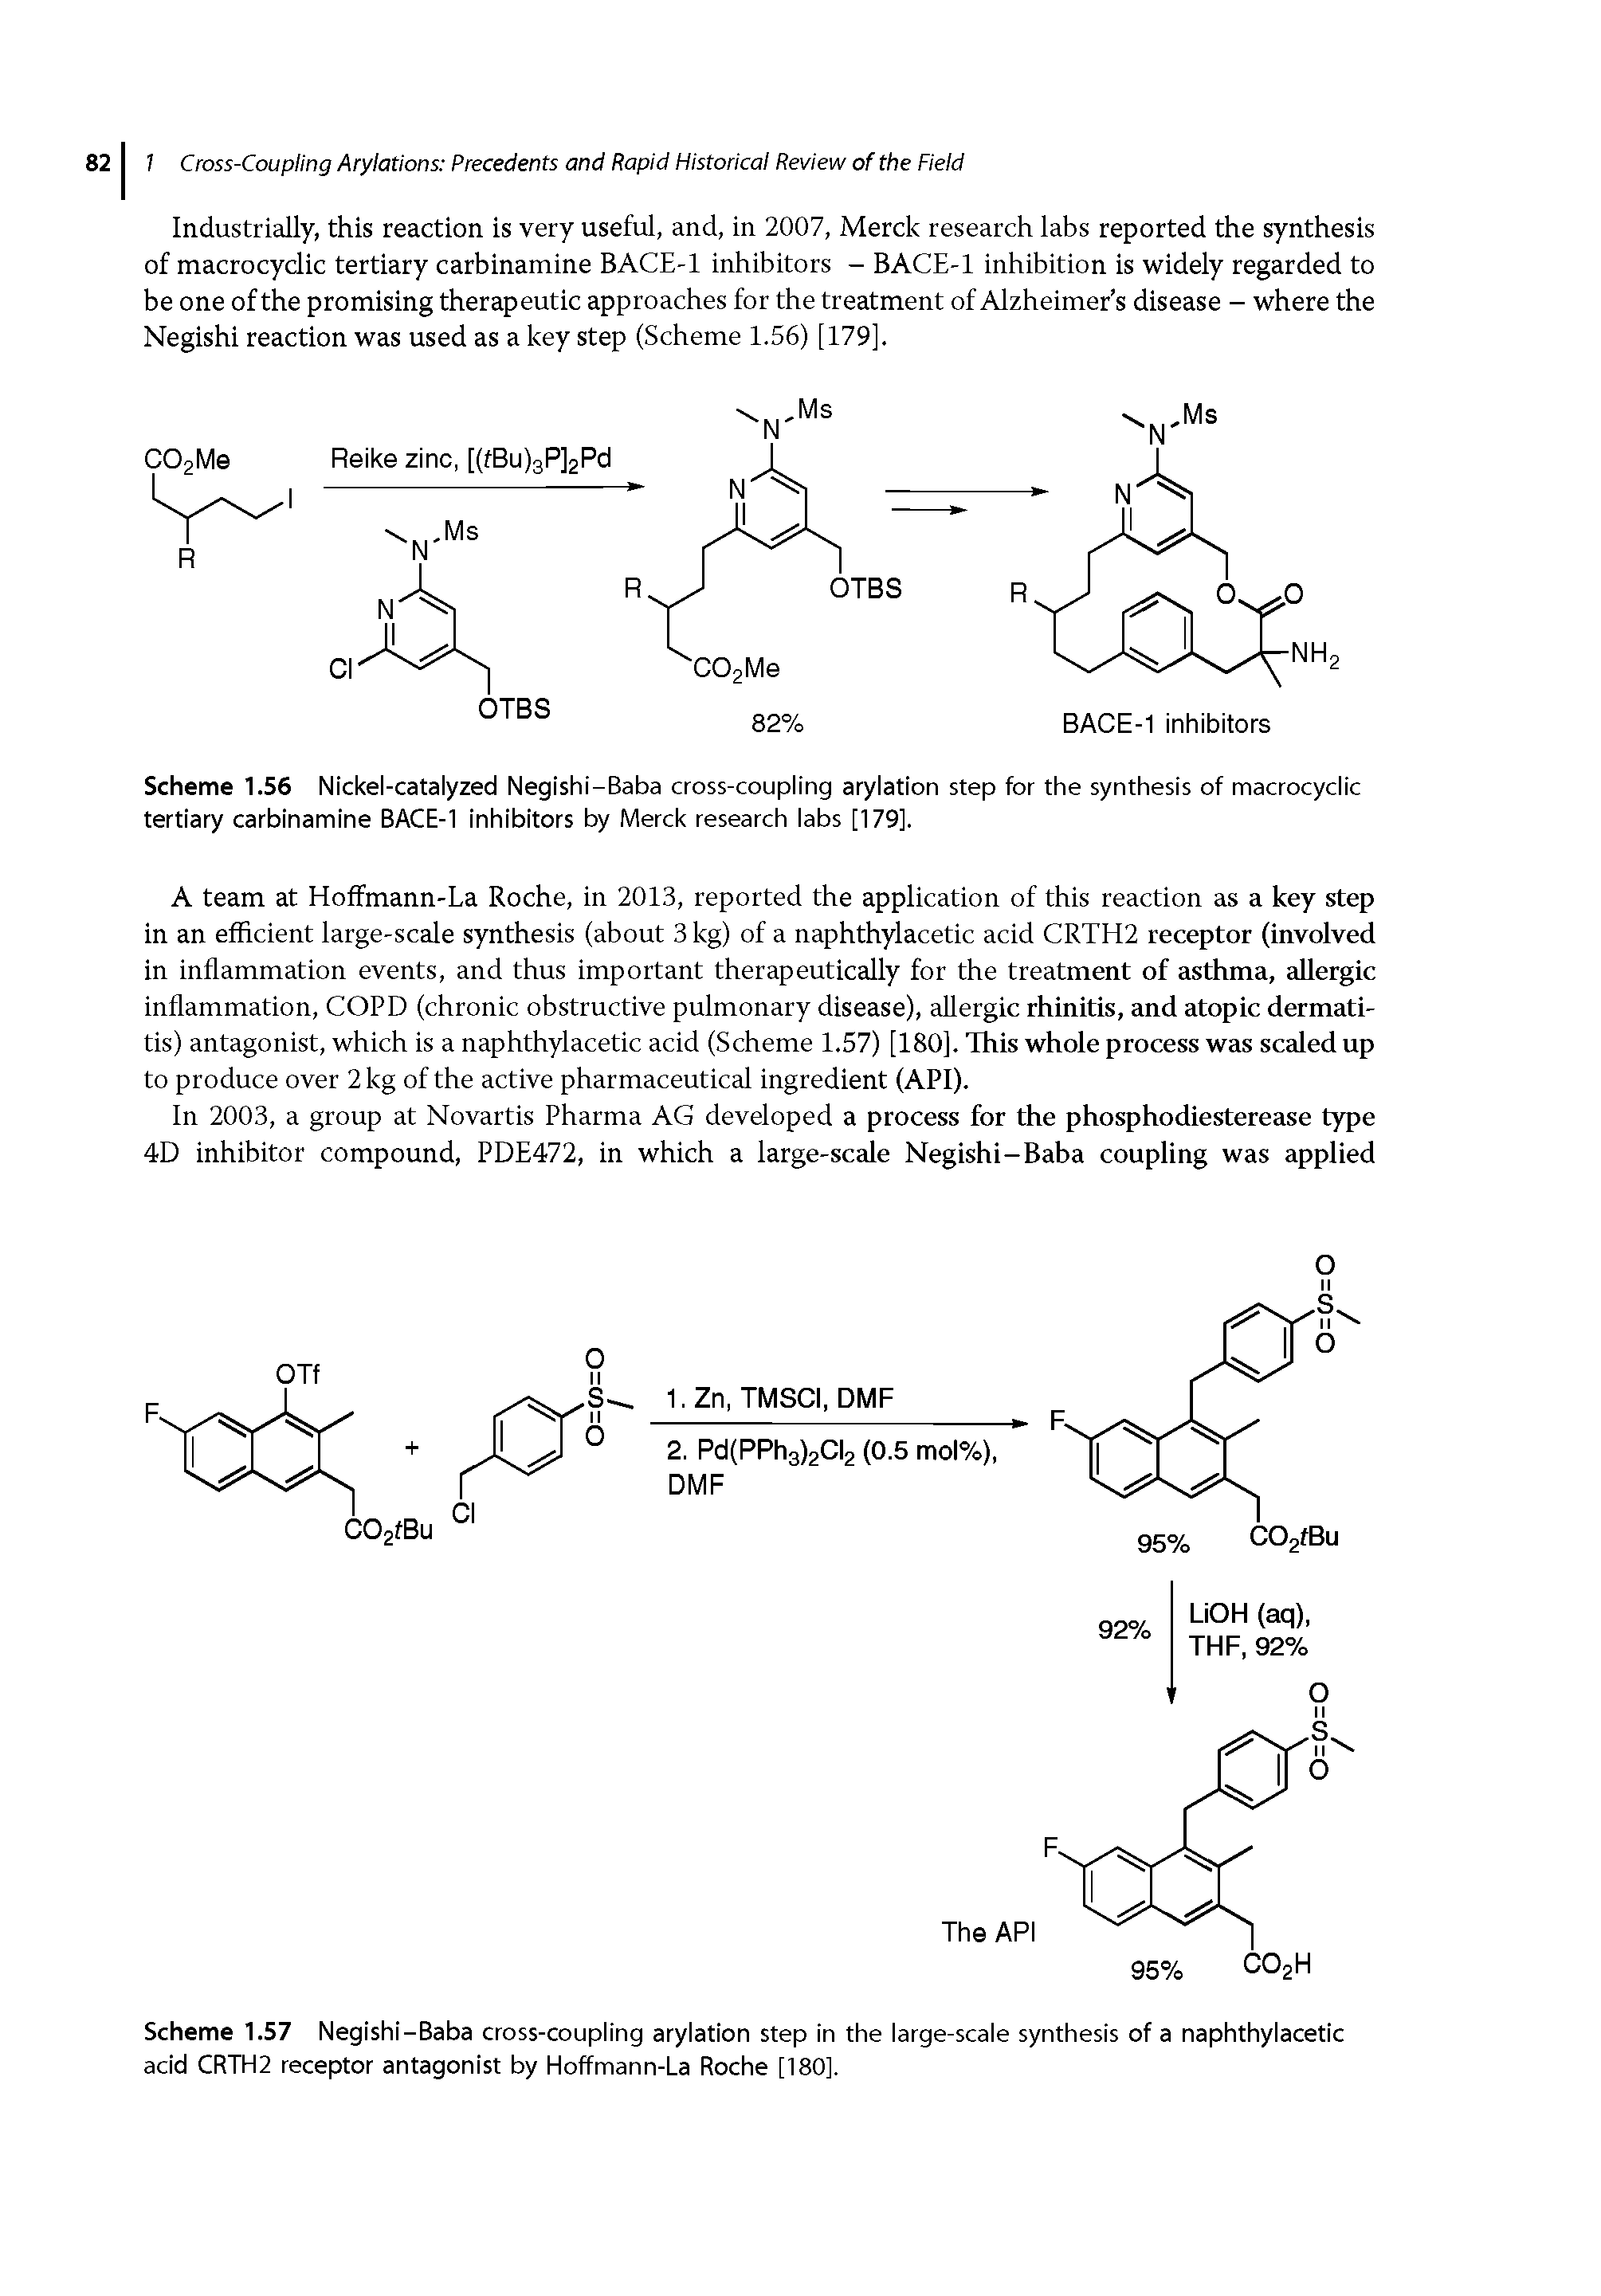 Scheme 1.57 Negishi-Baba cross-coupling arylation step in the large-scale synthesis of a naphthylacetic acid CRTH2 receptor antagonist by Hoffmann-La Roche [180].